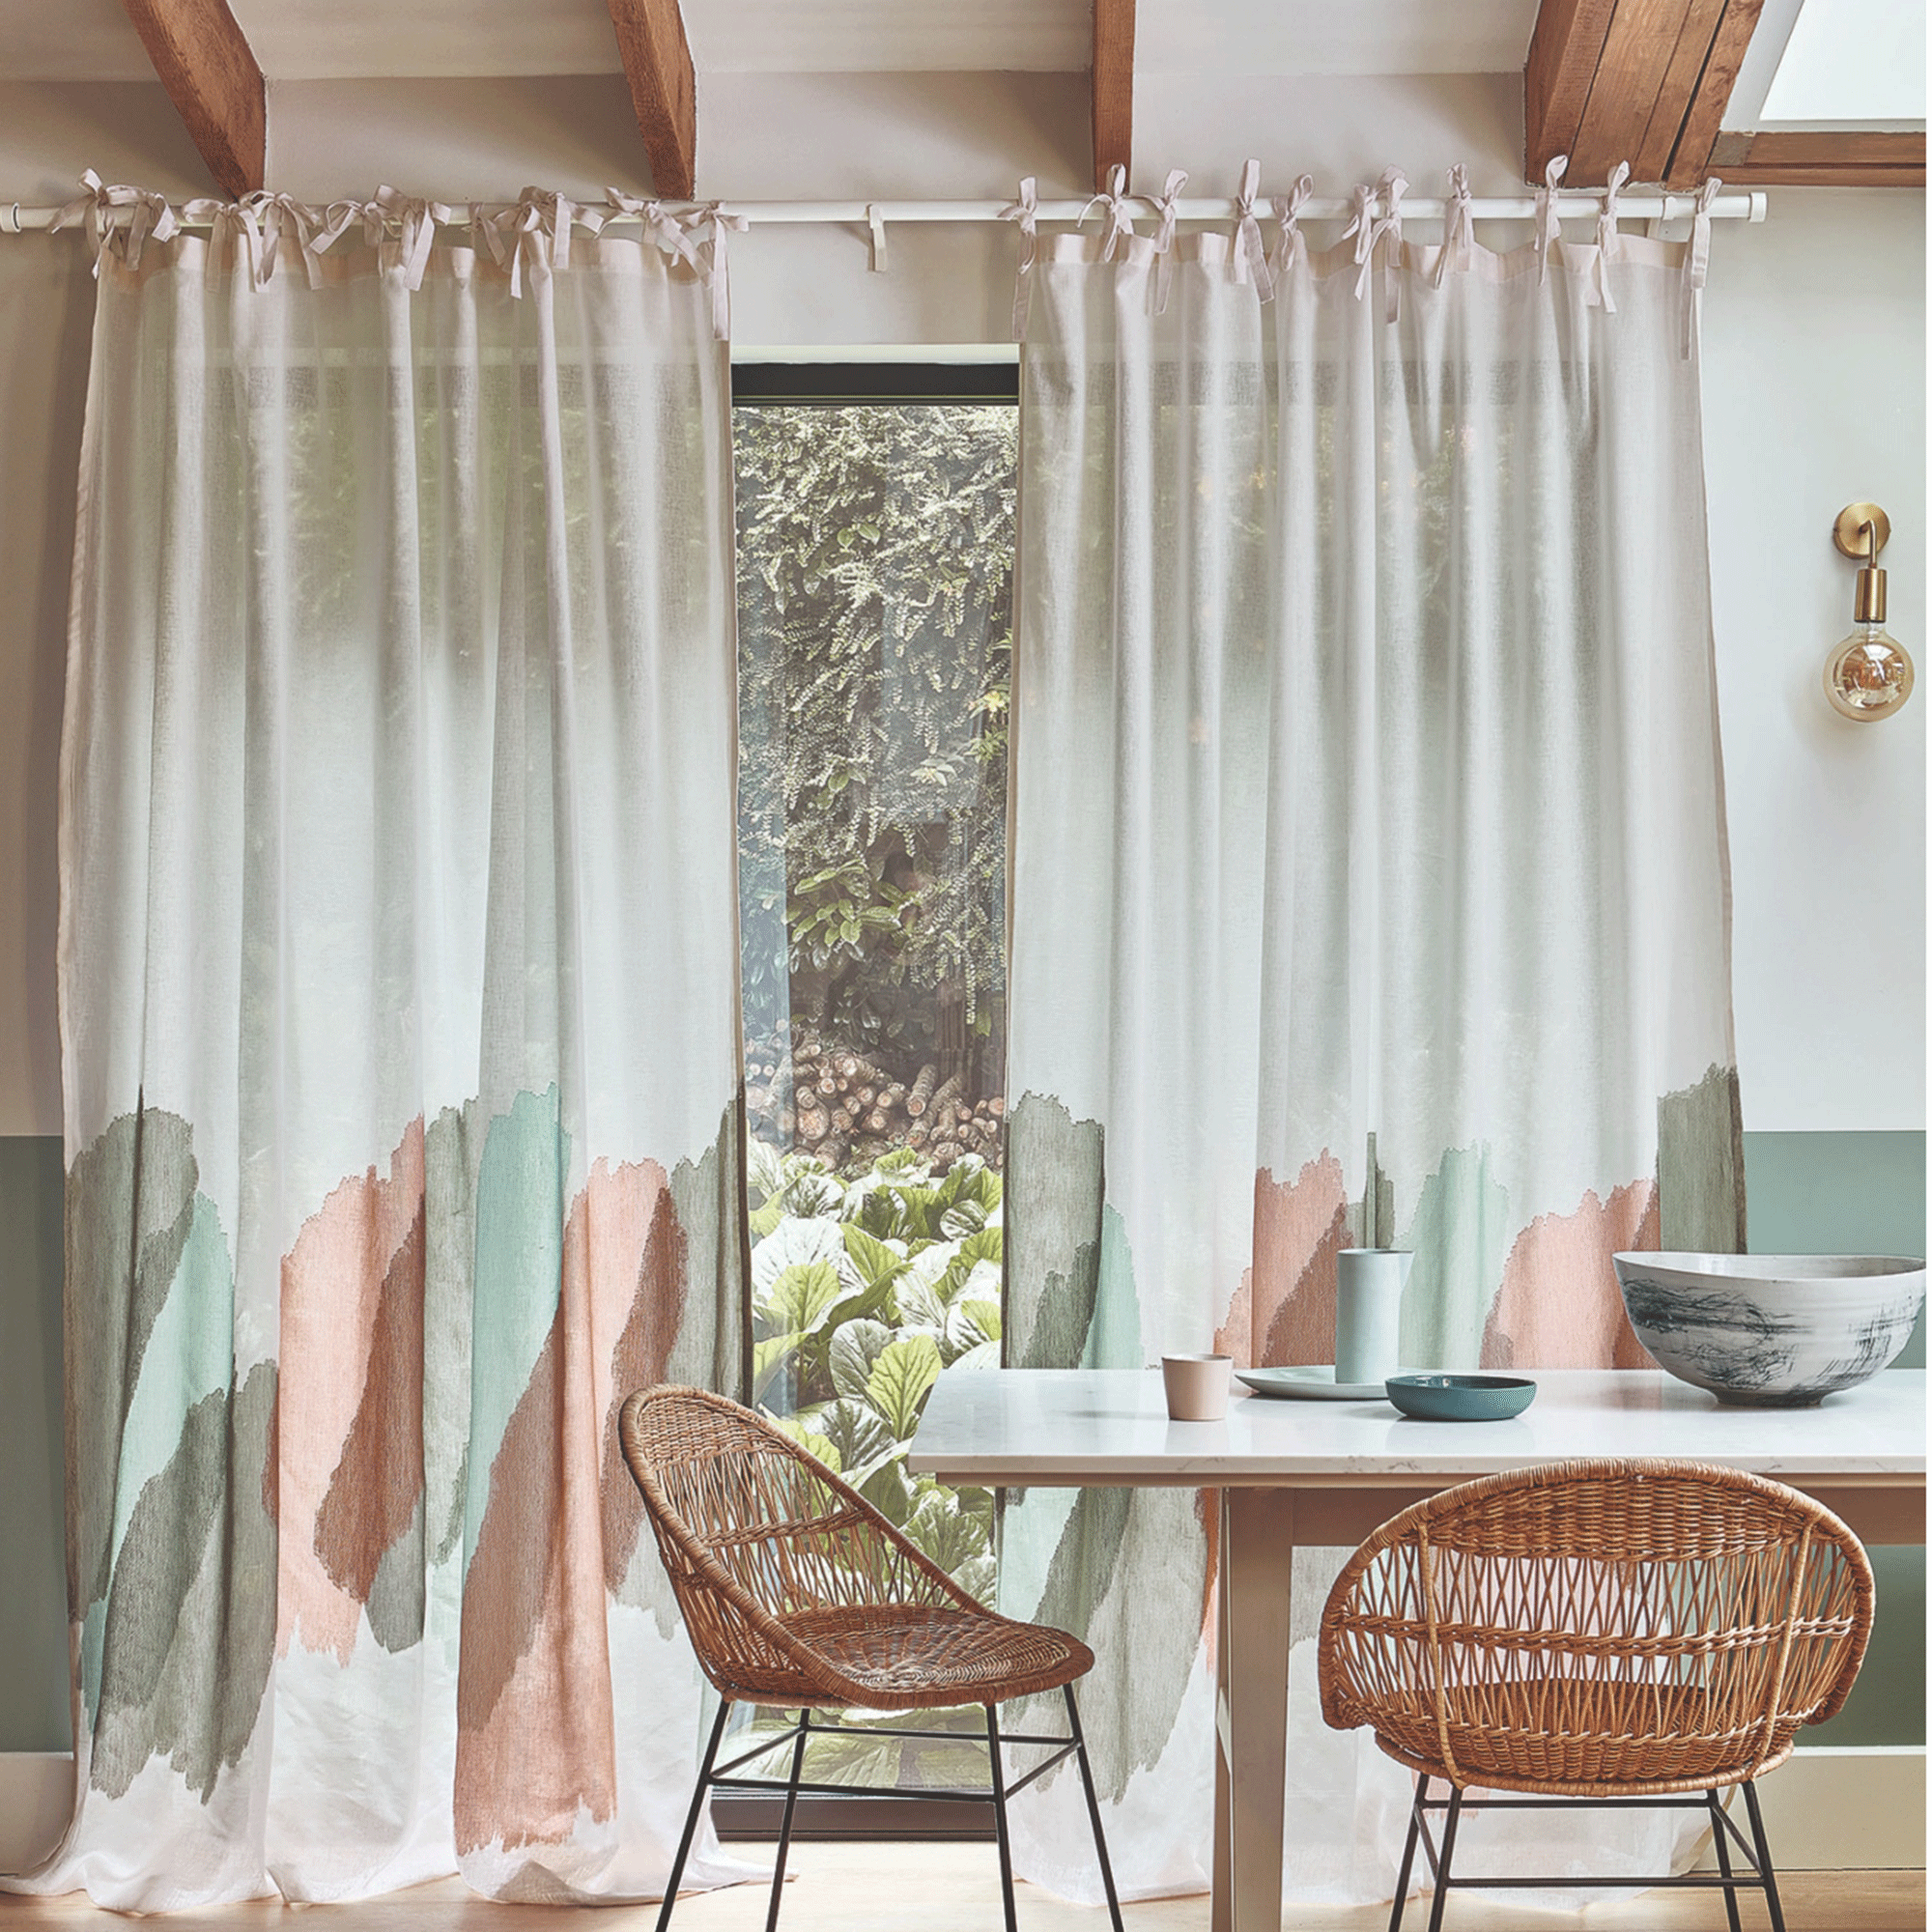 Green and pink curtains in dining room